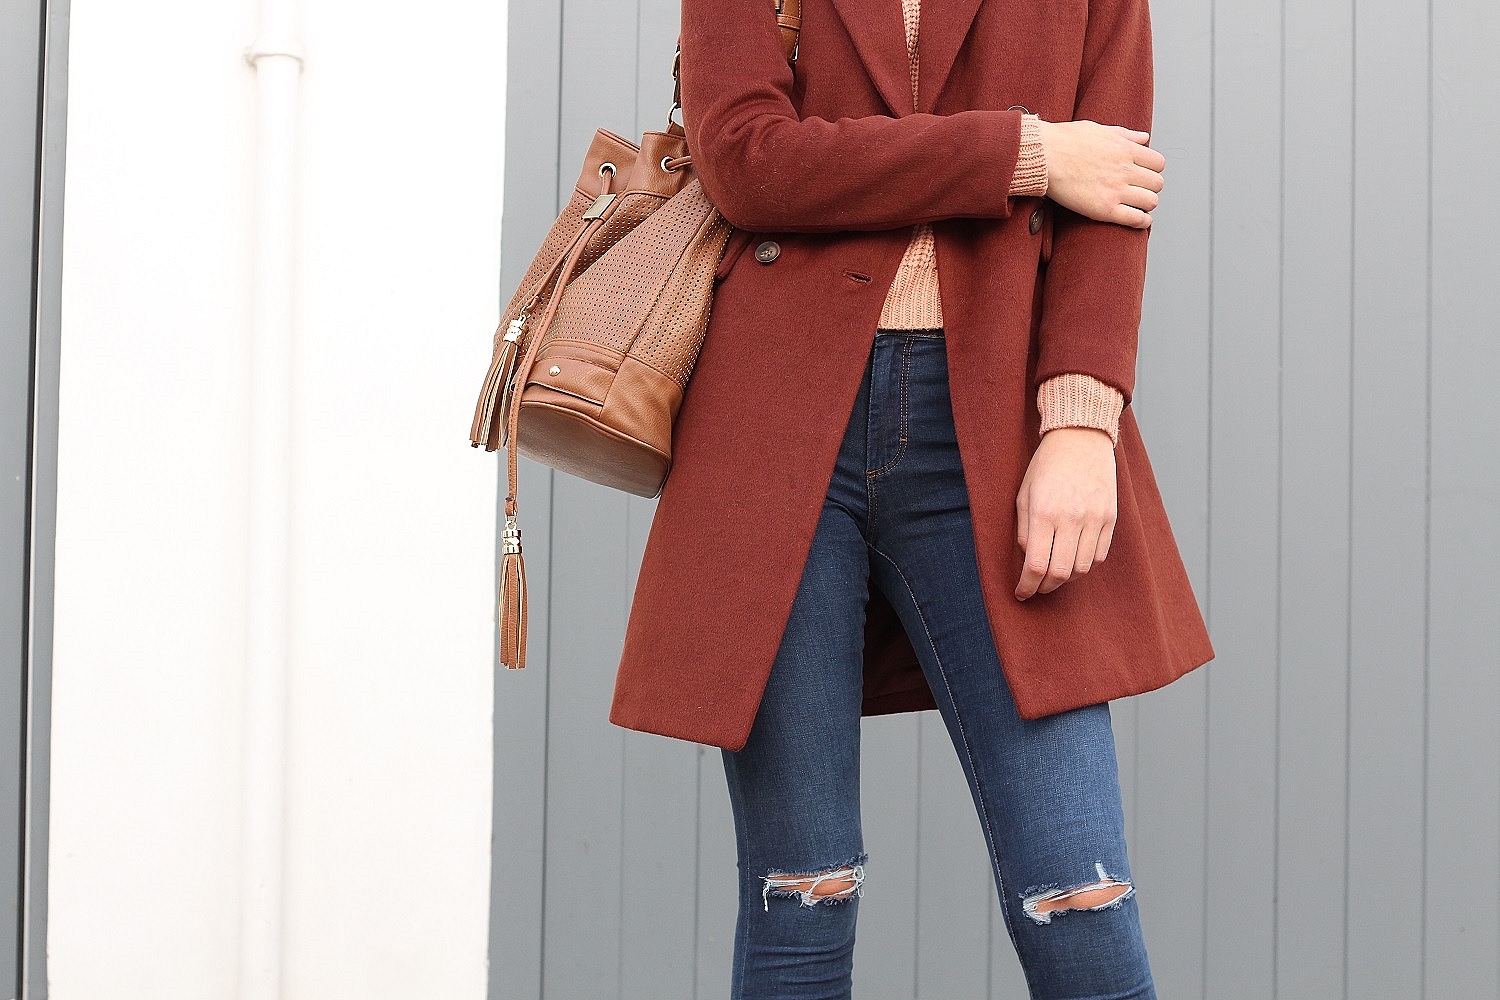 peexo fashion blogger wearing rust coat and autumn colours